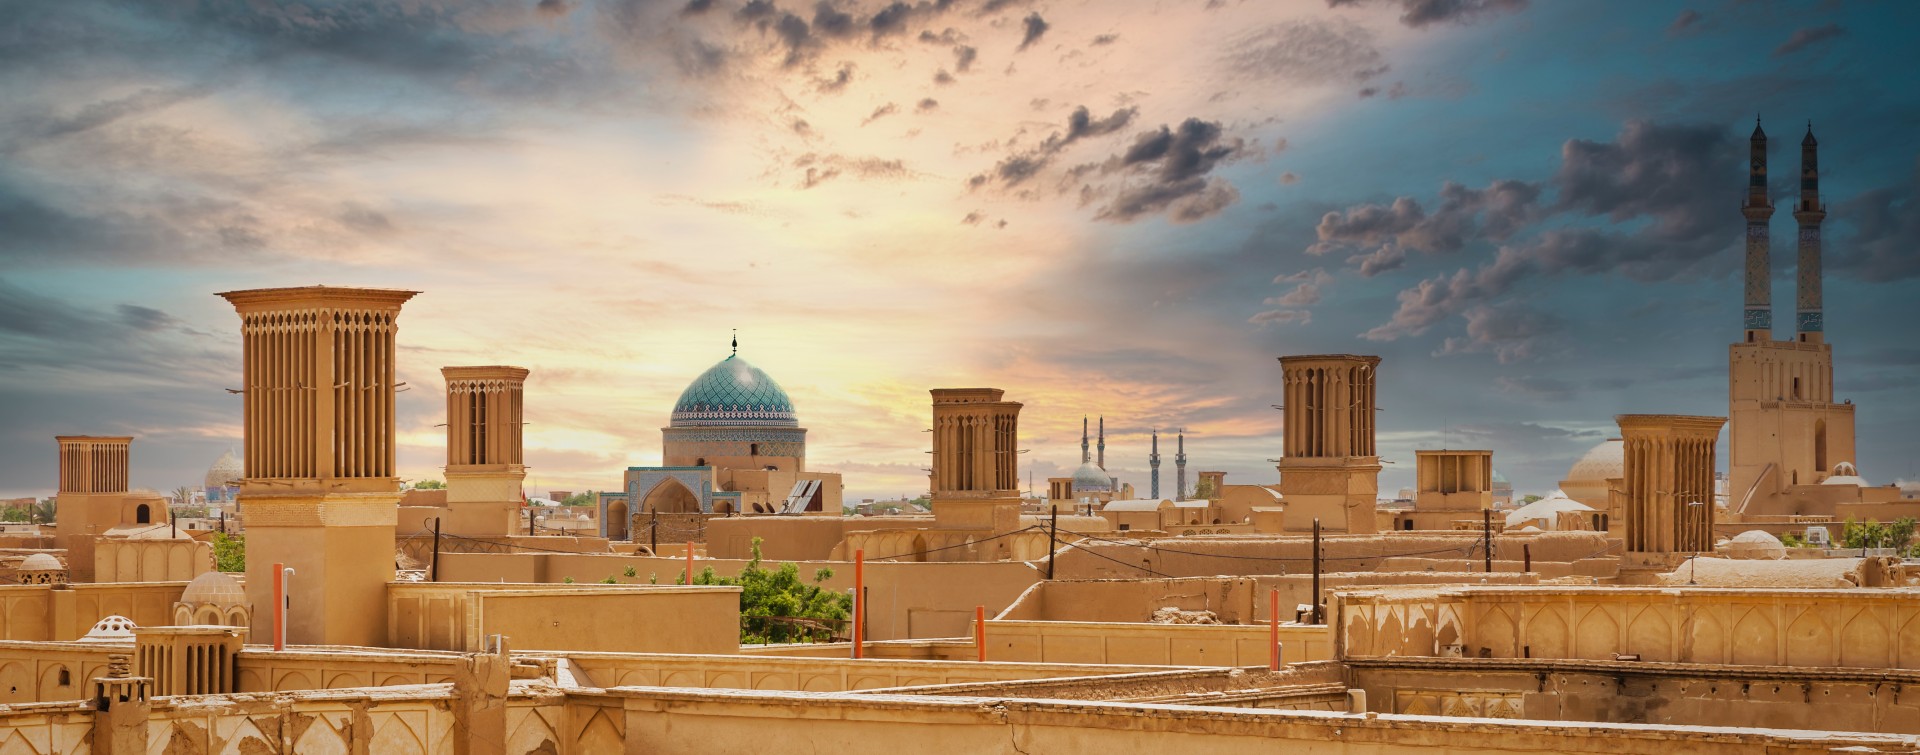 Wander through Yazd's historic old town